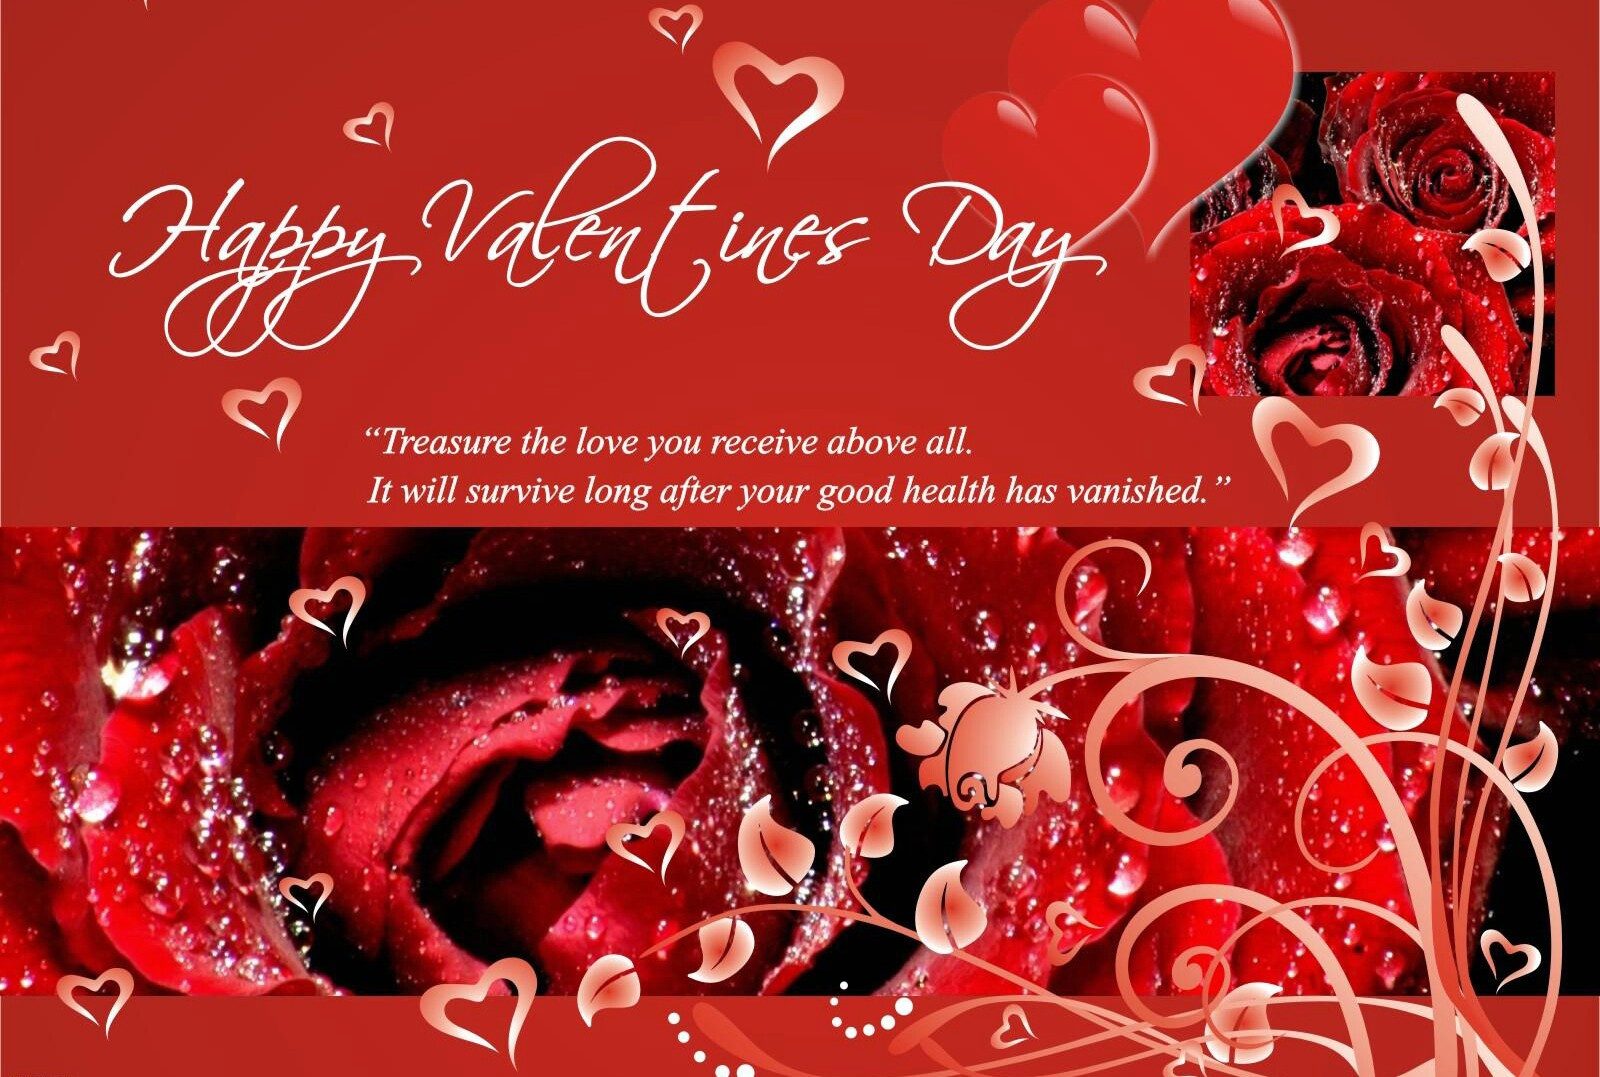 Quotes About Valentines Day
 Happy Valentine s Day Quotes on Cards Funny